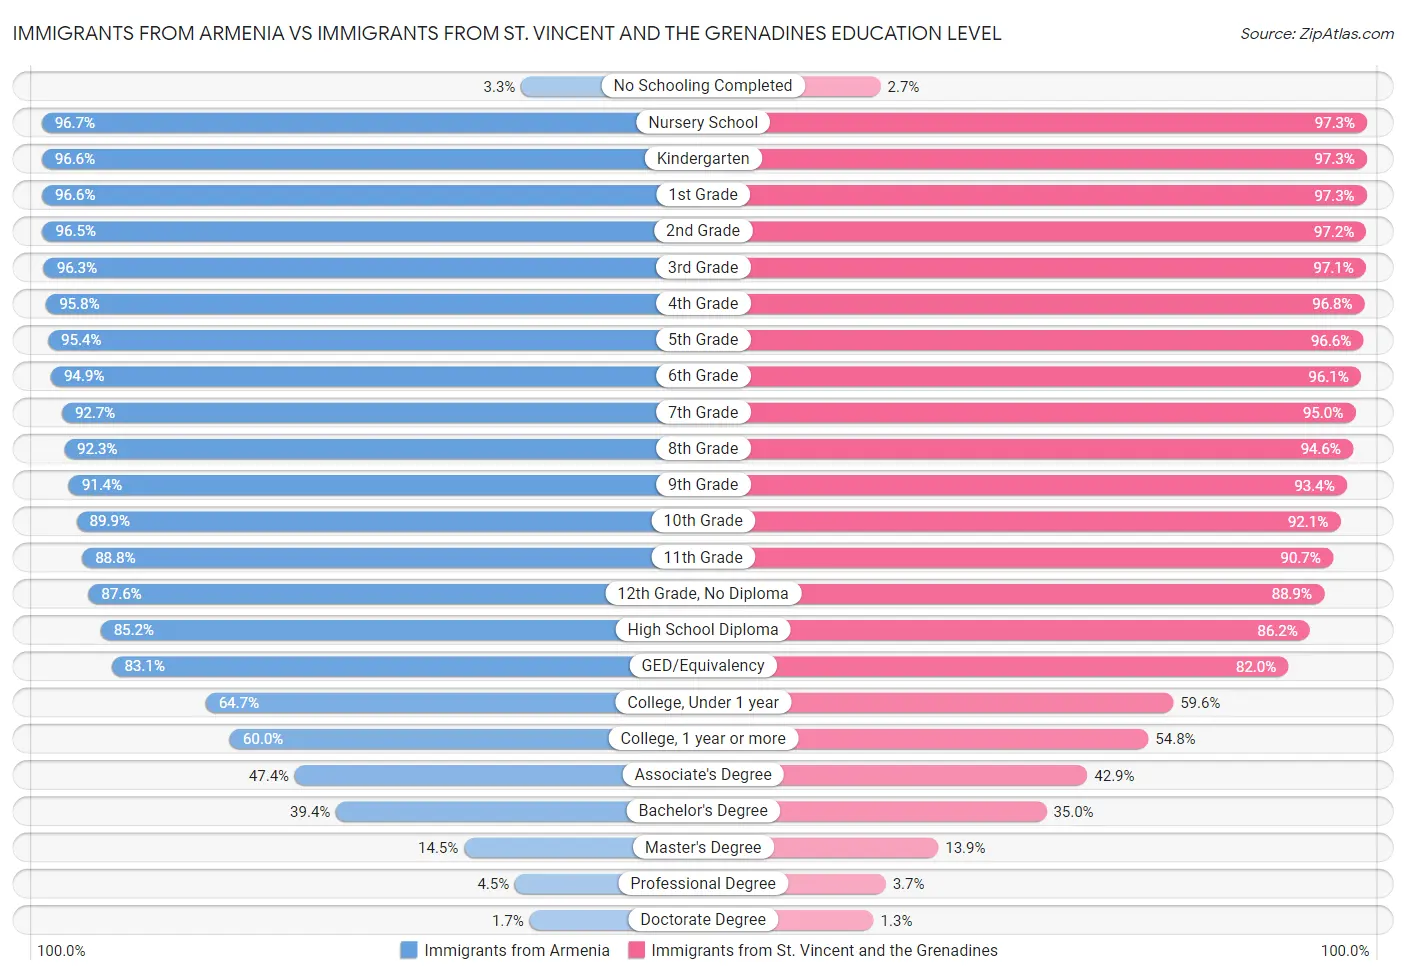 Immigrants from Armenia vs Immigrants from St. Vincent and the Grenadines Education Level